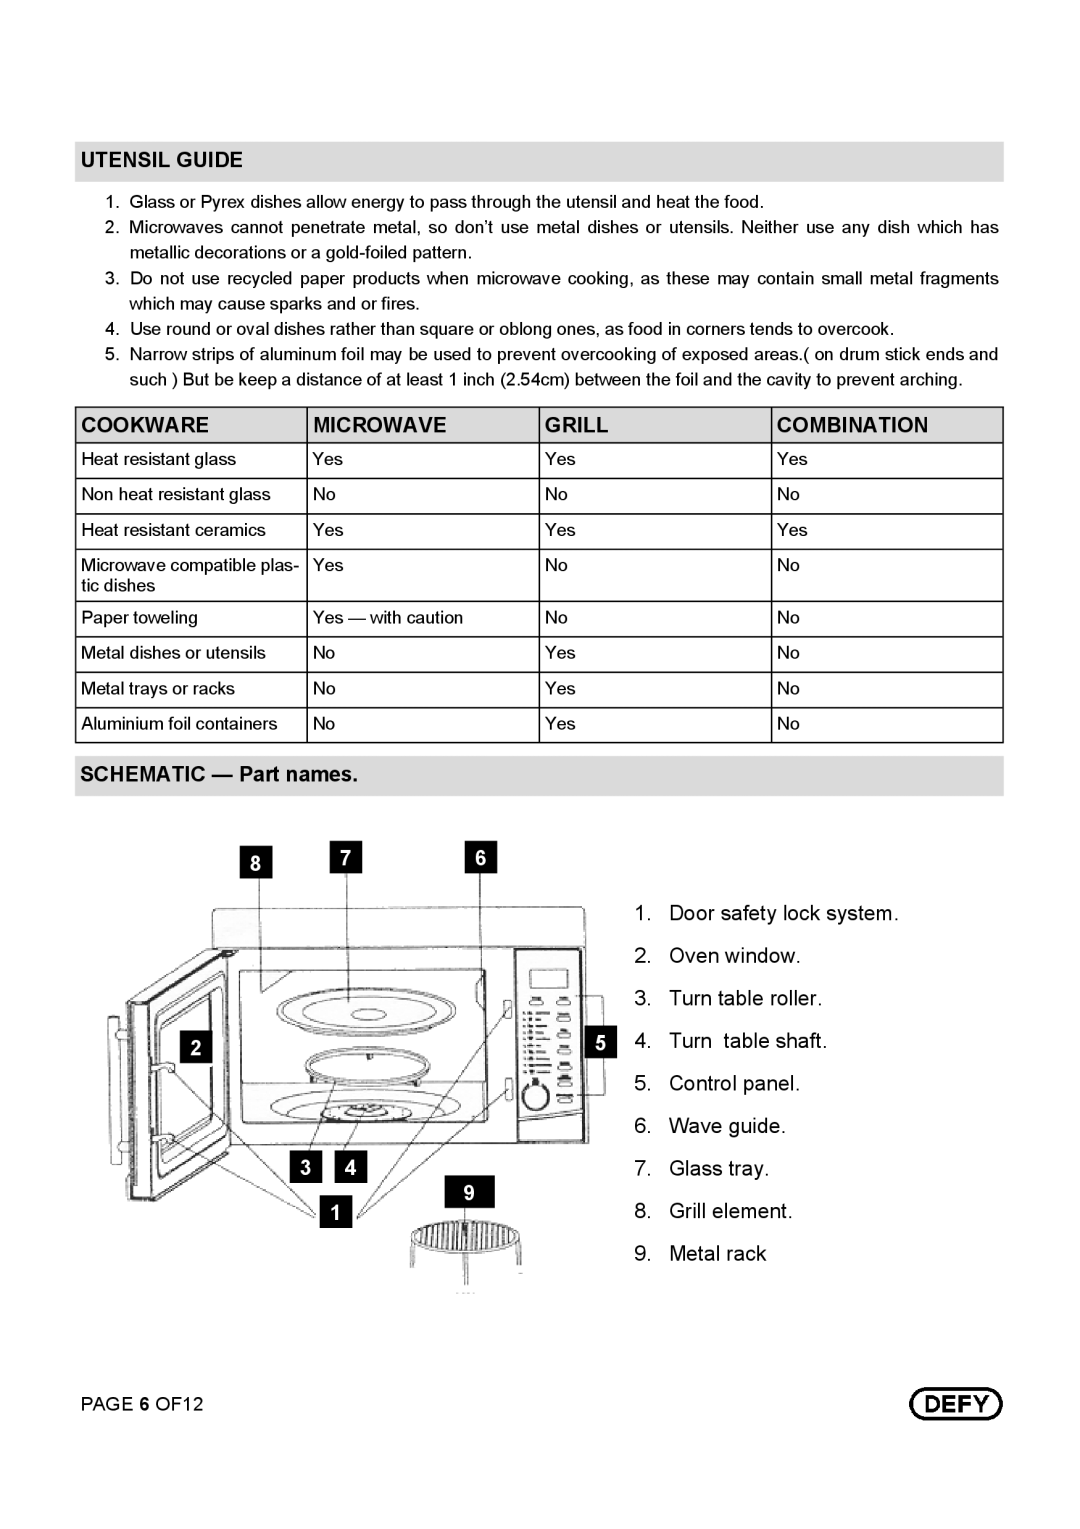 Defy Appliances DMO 343 owner manual Utensil Guide, Cookware, Microwave, Grill, Combination, SCHEMATIC - Part names 